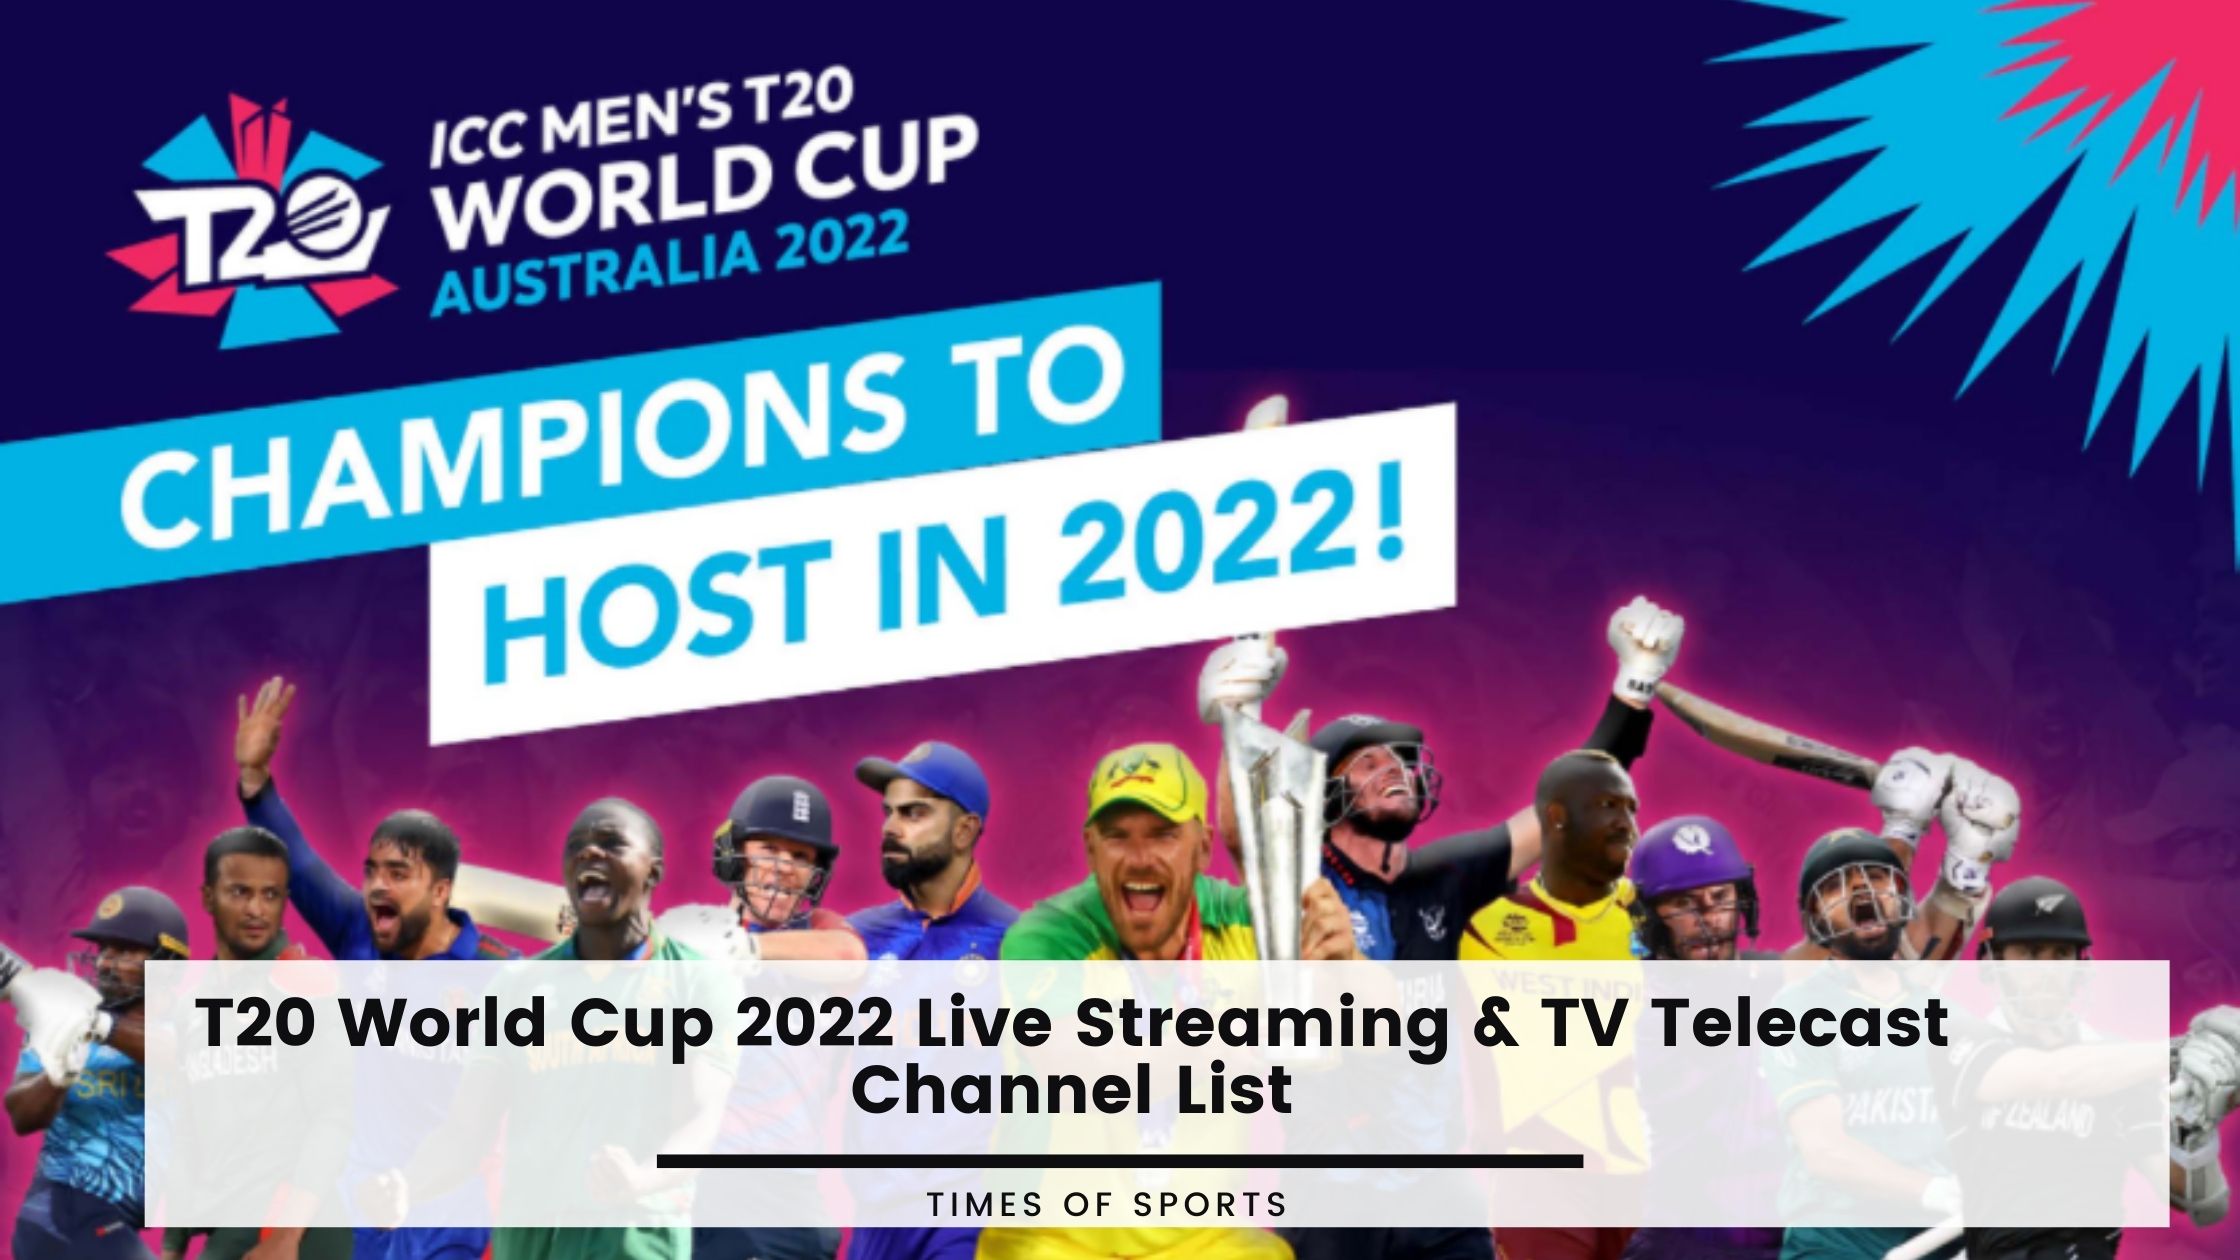 T20 World Cup 2022 Live Streaming and TV Telecast Channel List